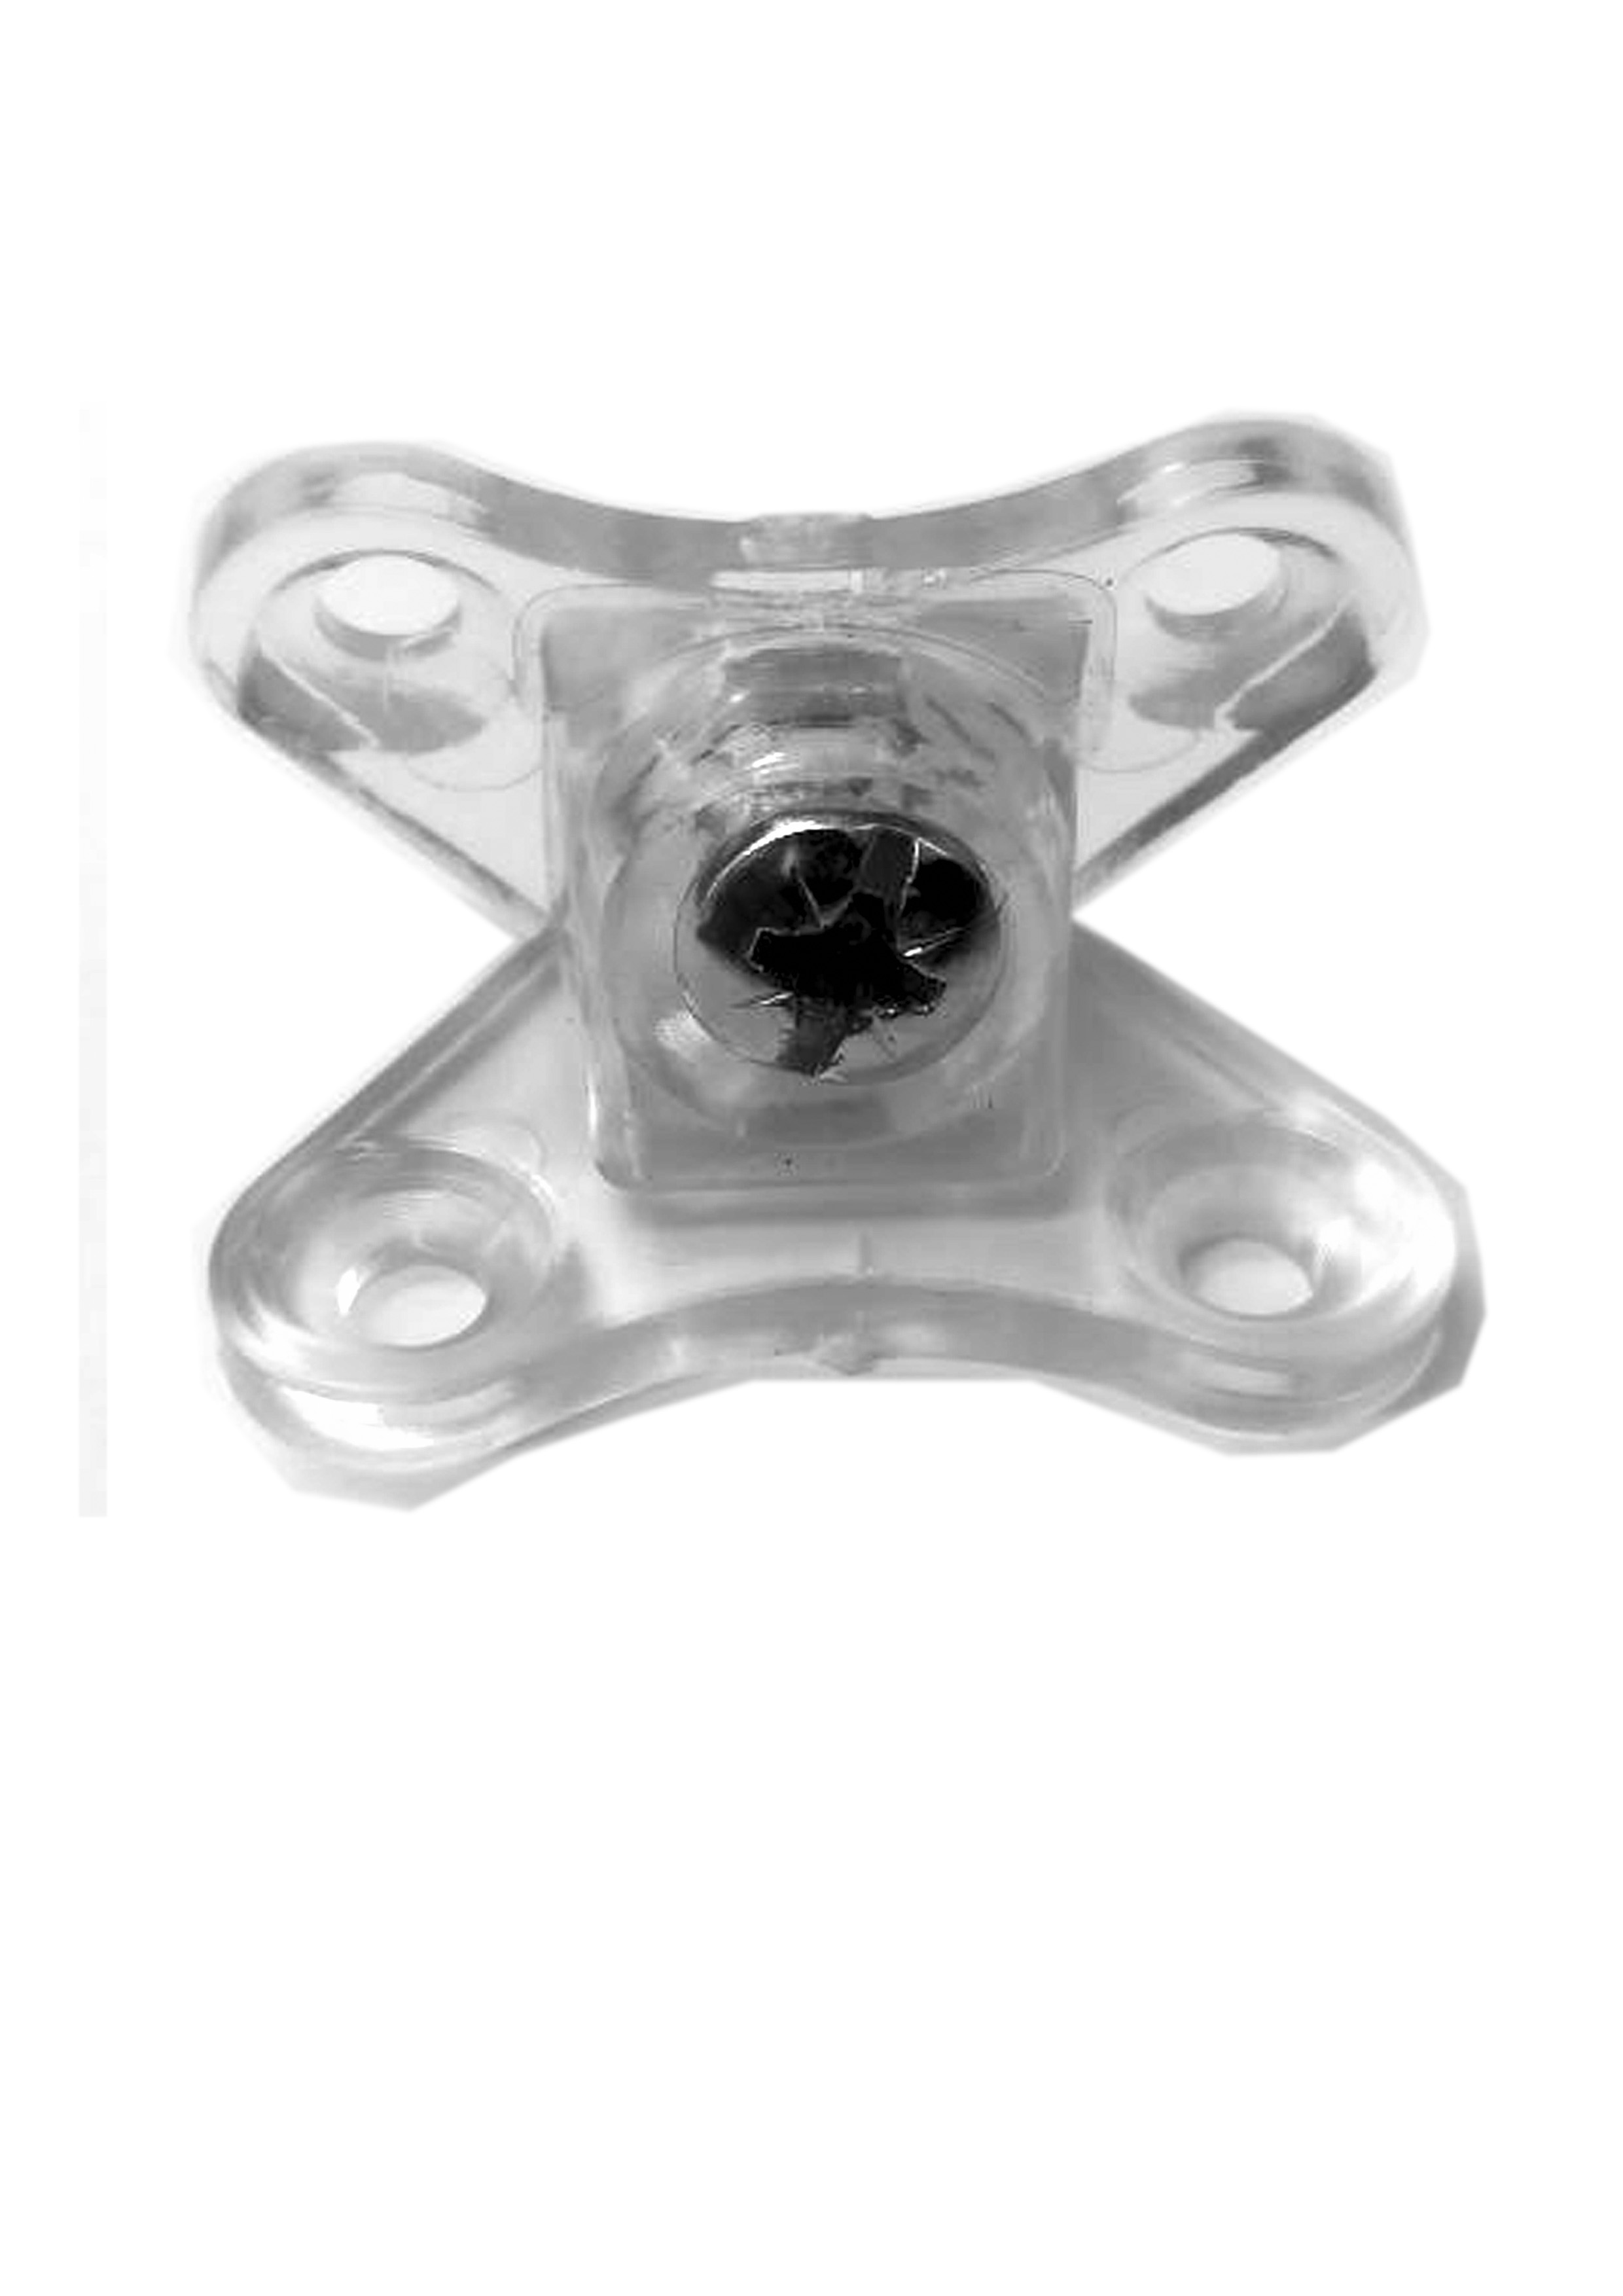 CONNECTING FITTING MINI PLASTIC CLEAR